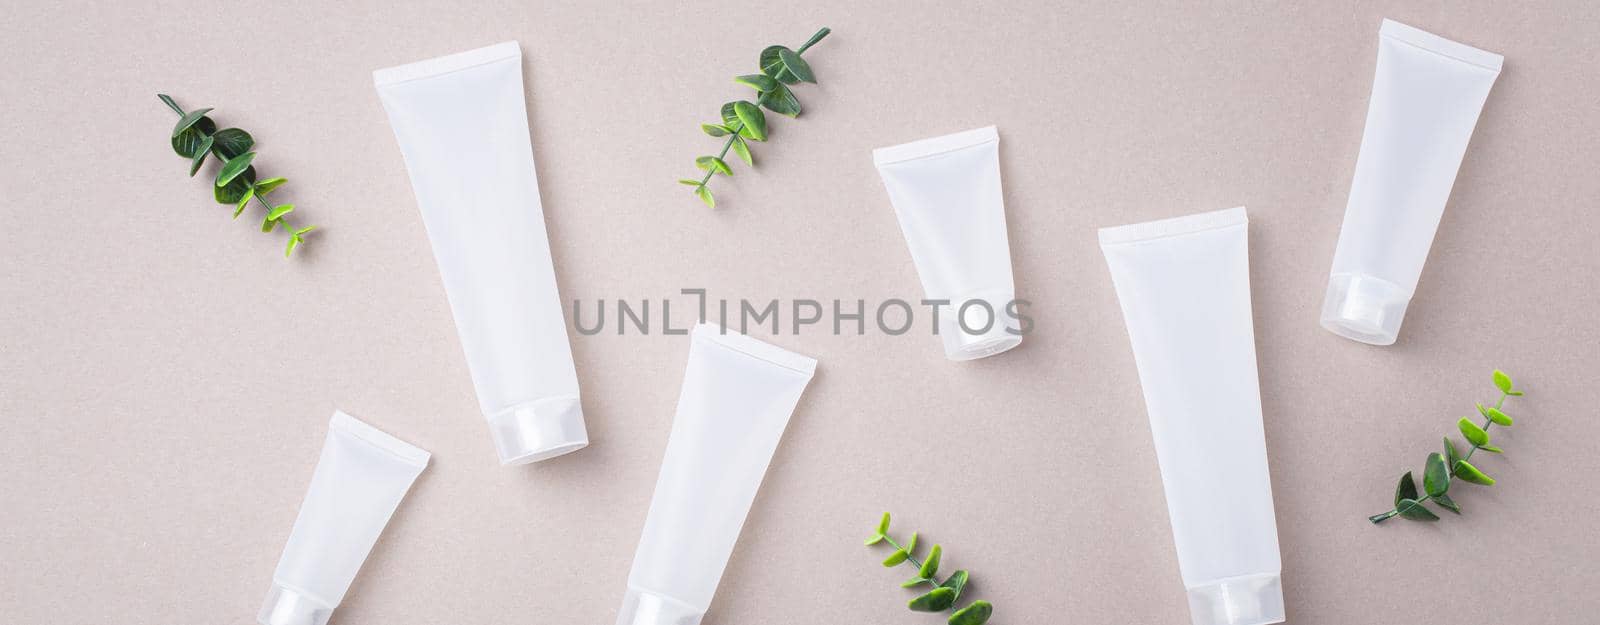 Set of skincare organic beauty product bottles and SPA cosmetic blank white matte containers with green plant leaves eucalyptus on gray clean background from above, flat lay mockup